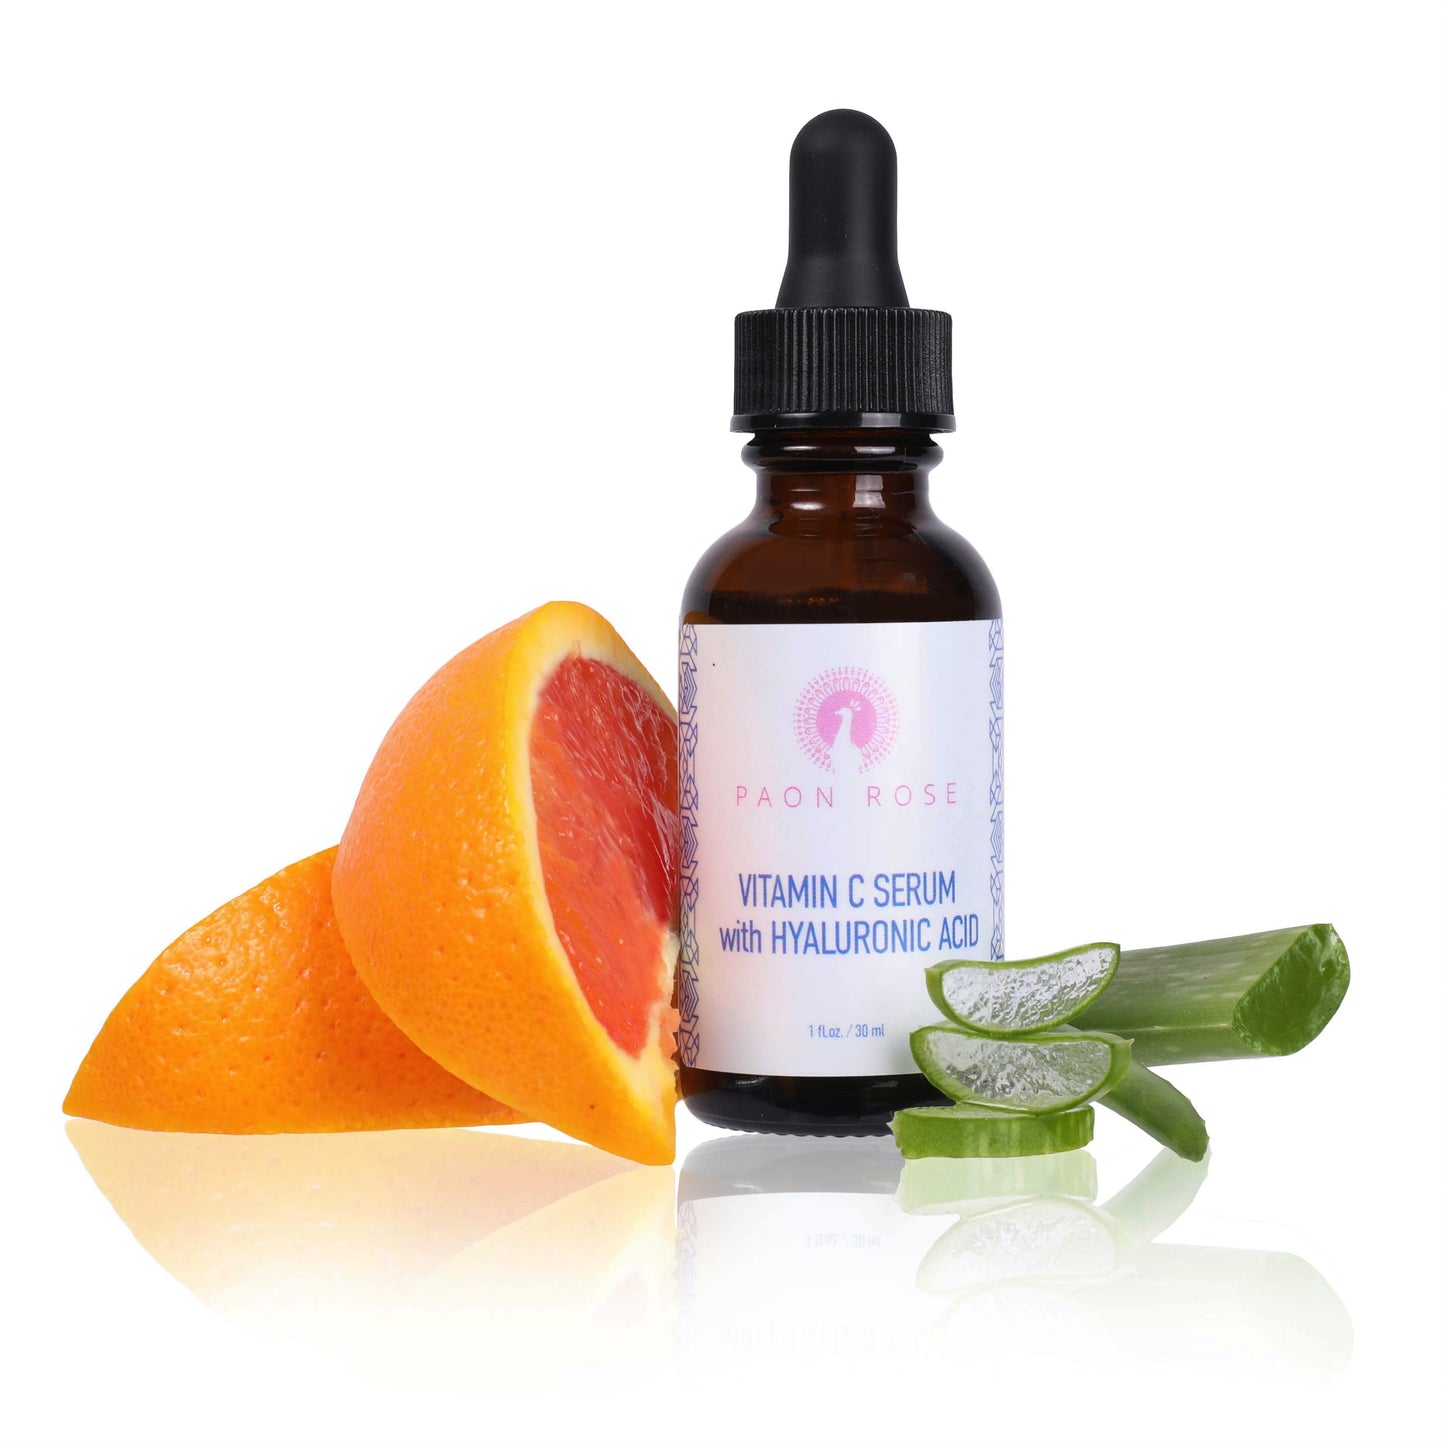 vitamin c serum with hyaluronic acid beside orange and lime slices